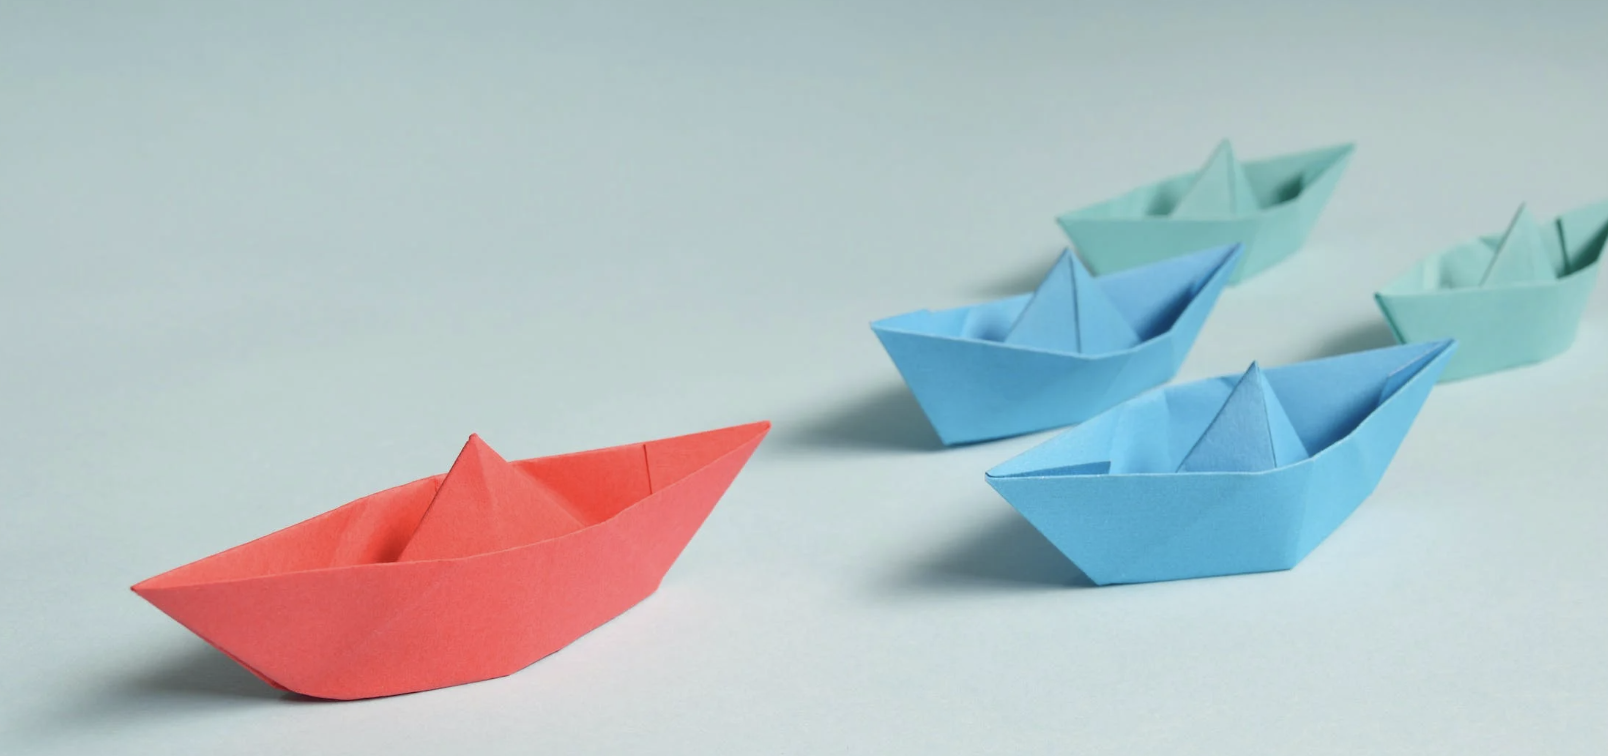 Definition of leadership represented by paper boats flowing behind a leader.